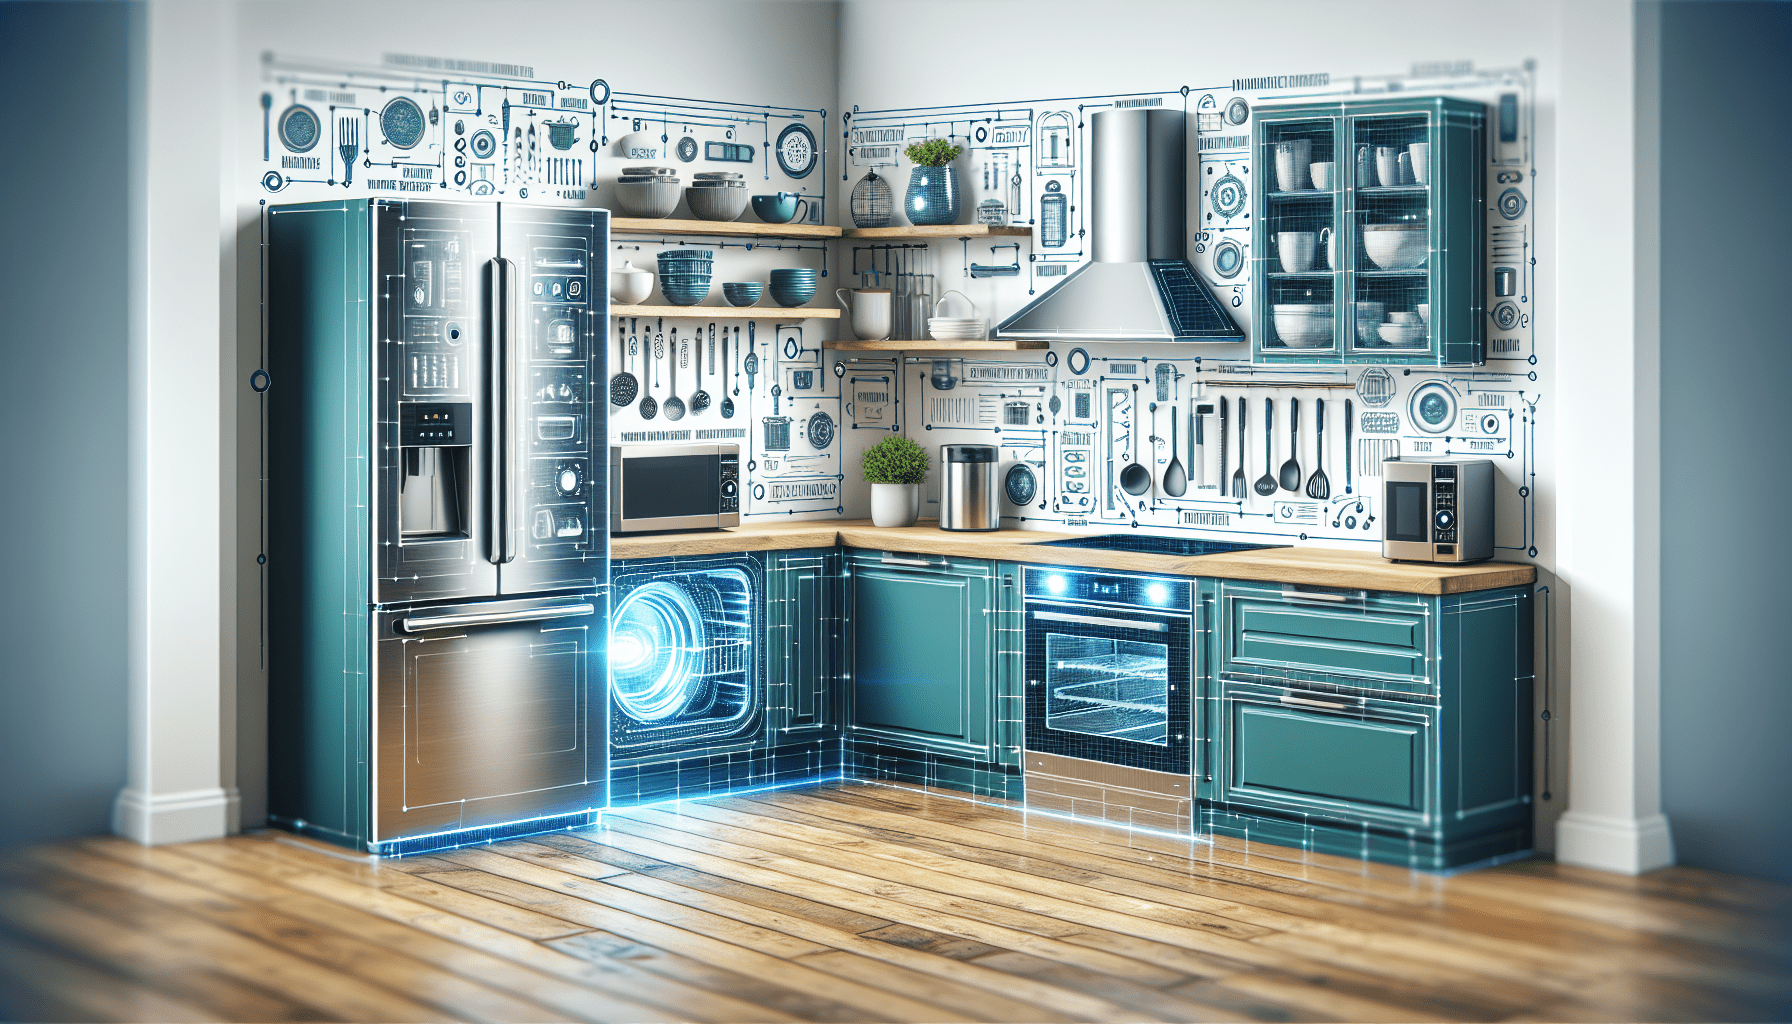 What Is The Newest Color For Kitchen Appliances?